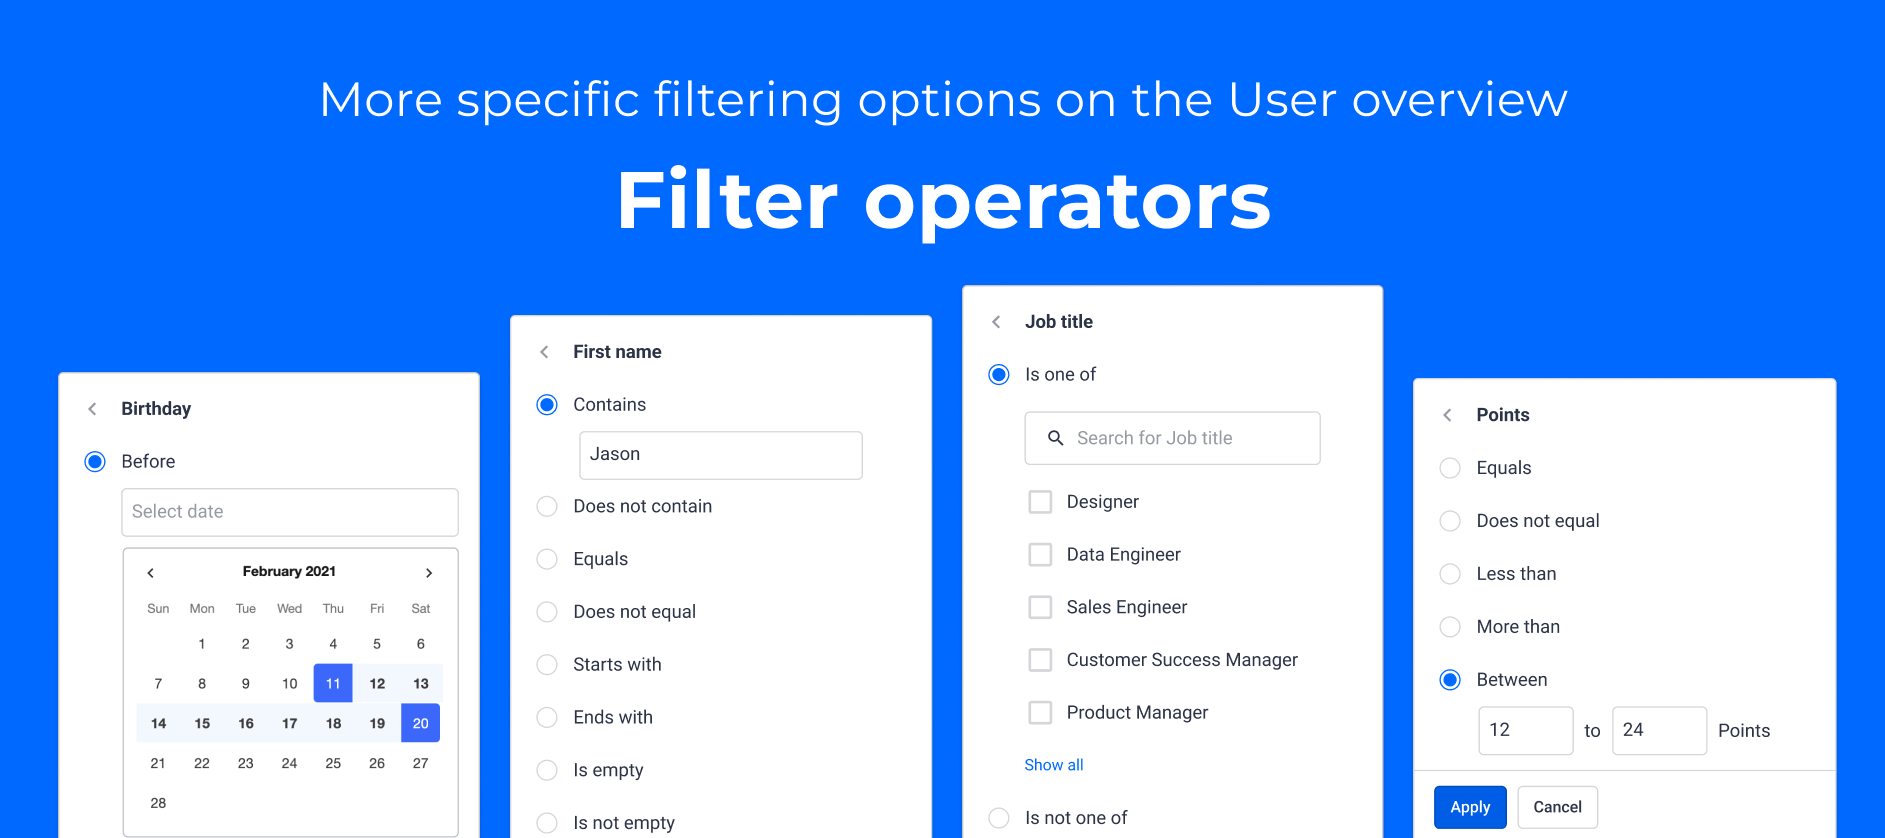 Filter operators on the User overview